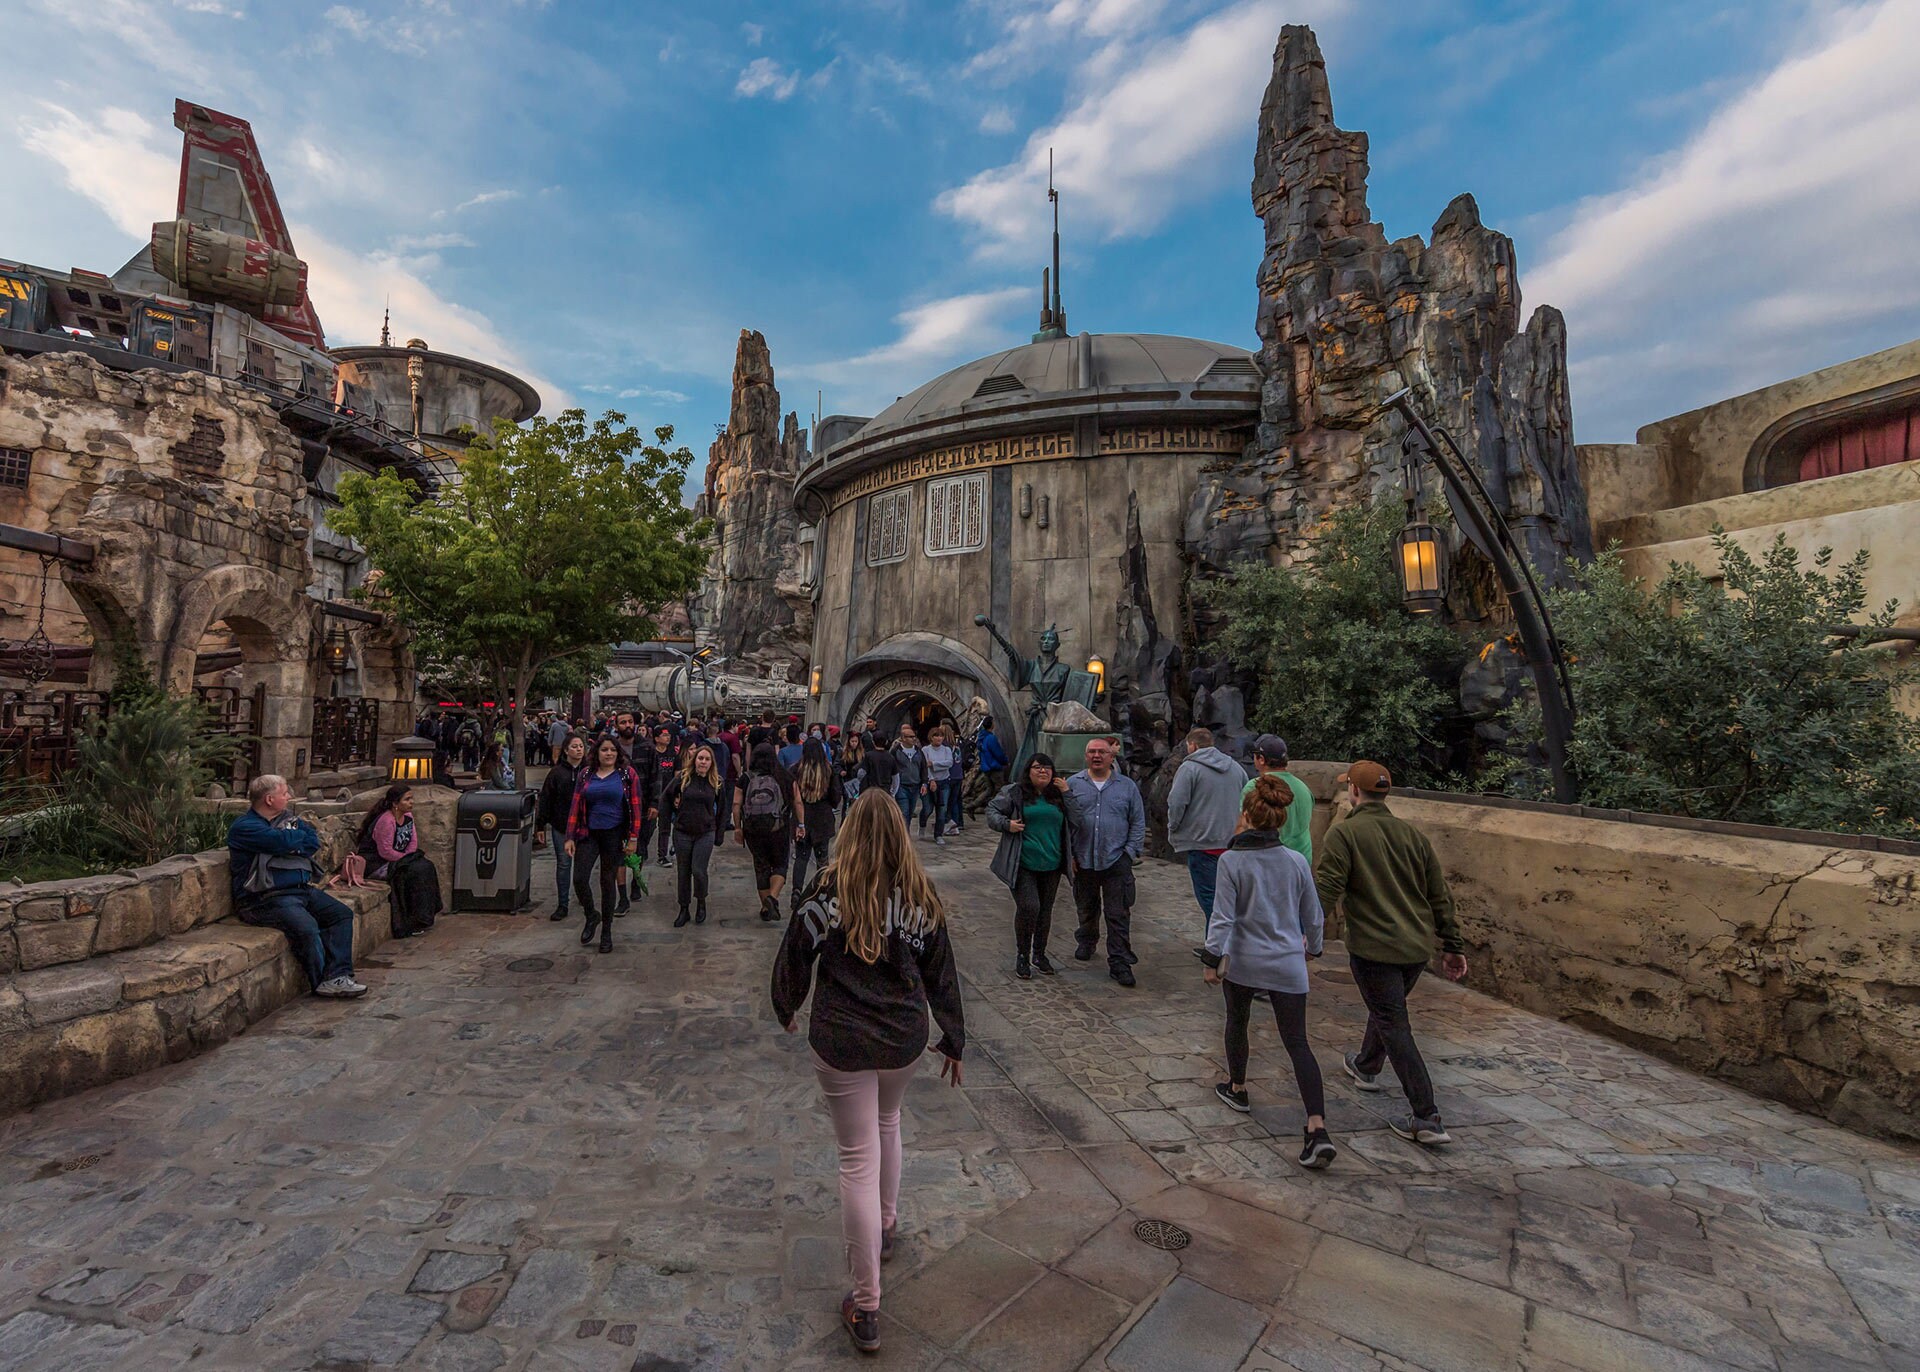 Guests visiting Star Wars: Galaxy’s Edge will be able to wander the lively marketplace of Black Spire Outpost and encounter a robust collection of merchant shops and stalls filled with authentic Star Wars creations.